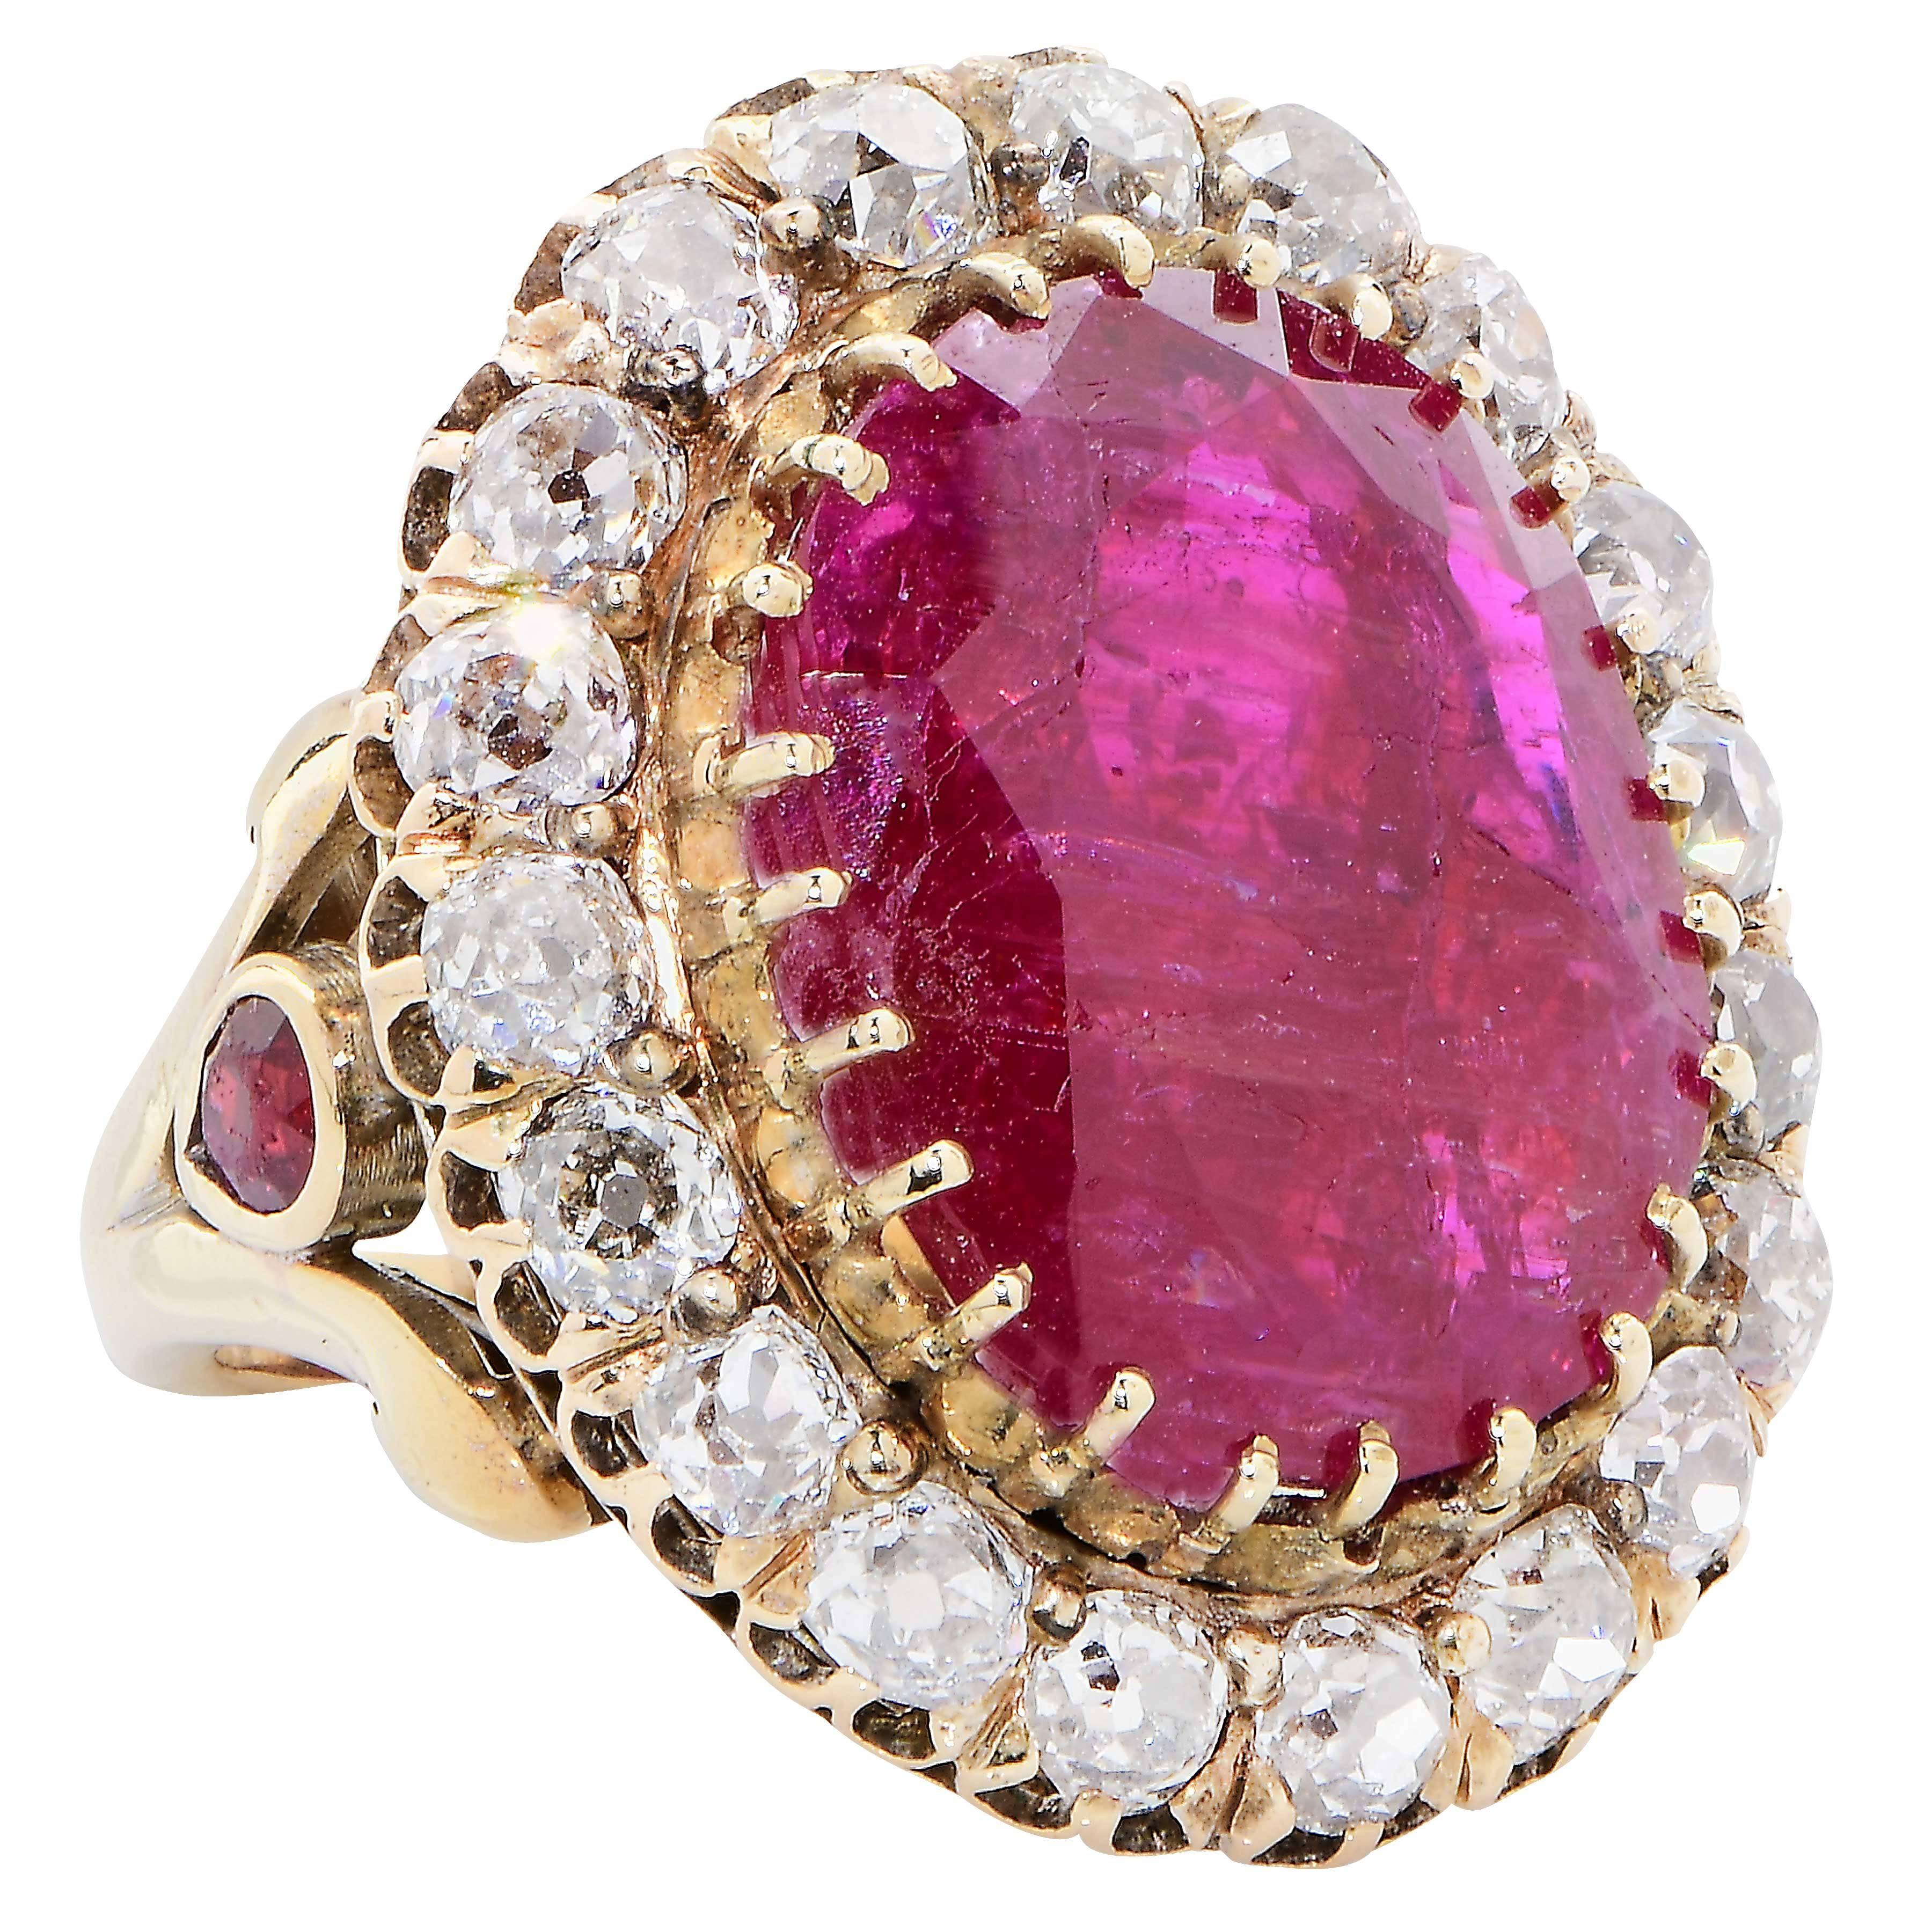 12 Carat Natural Ruby 3.5 Carat Diamond Cluster Ring For Sale